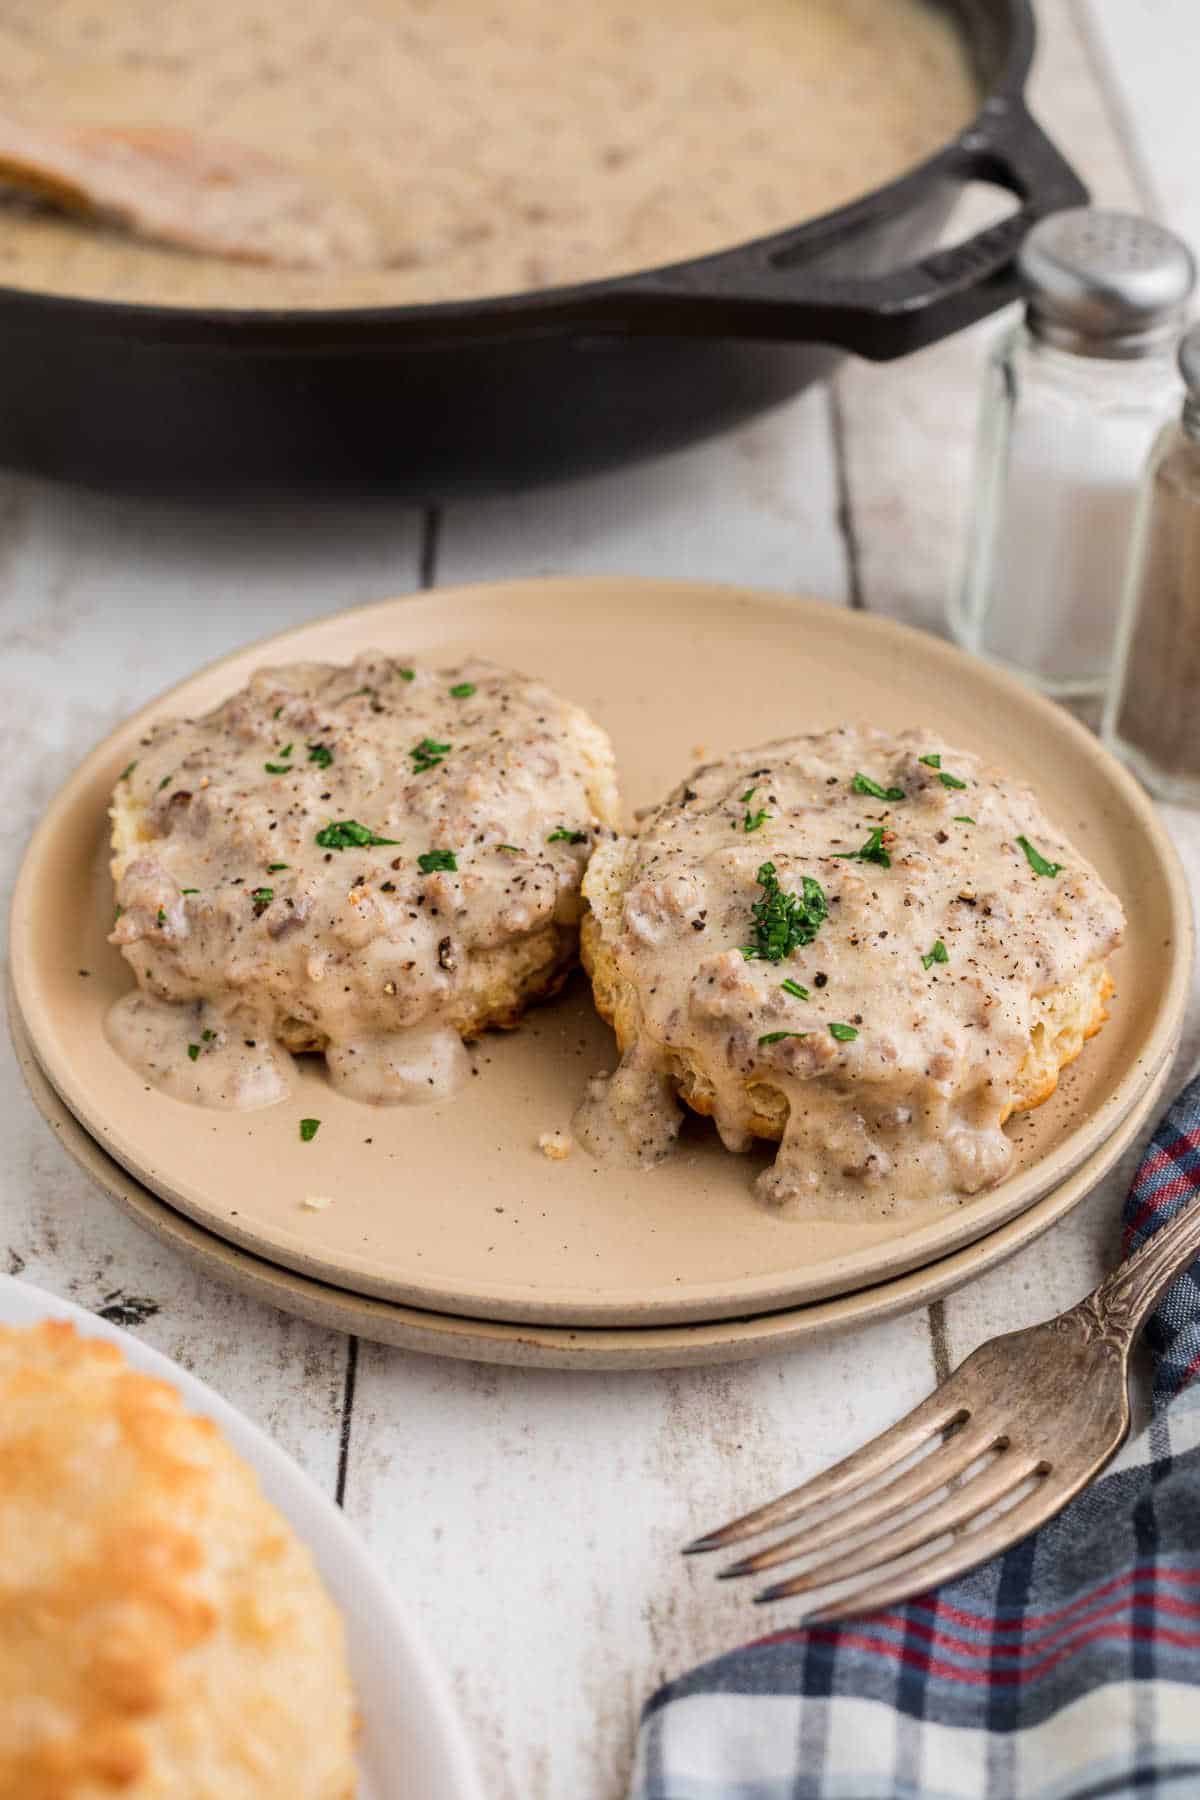 Biscuits and gravy on a plate with a skillet full of sausage gravy in the background.